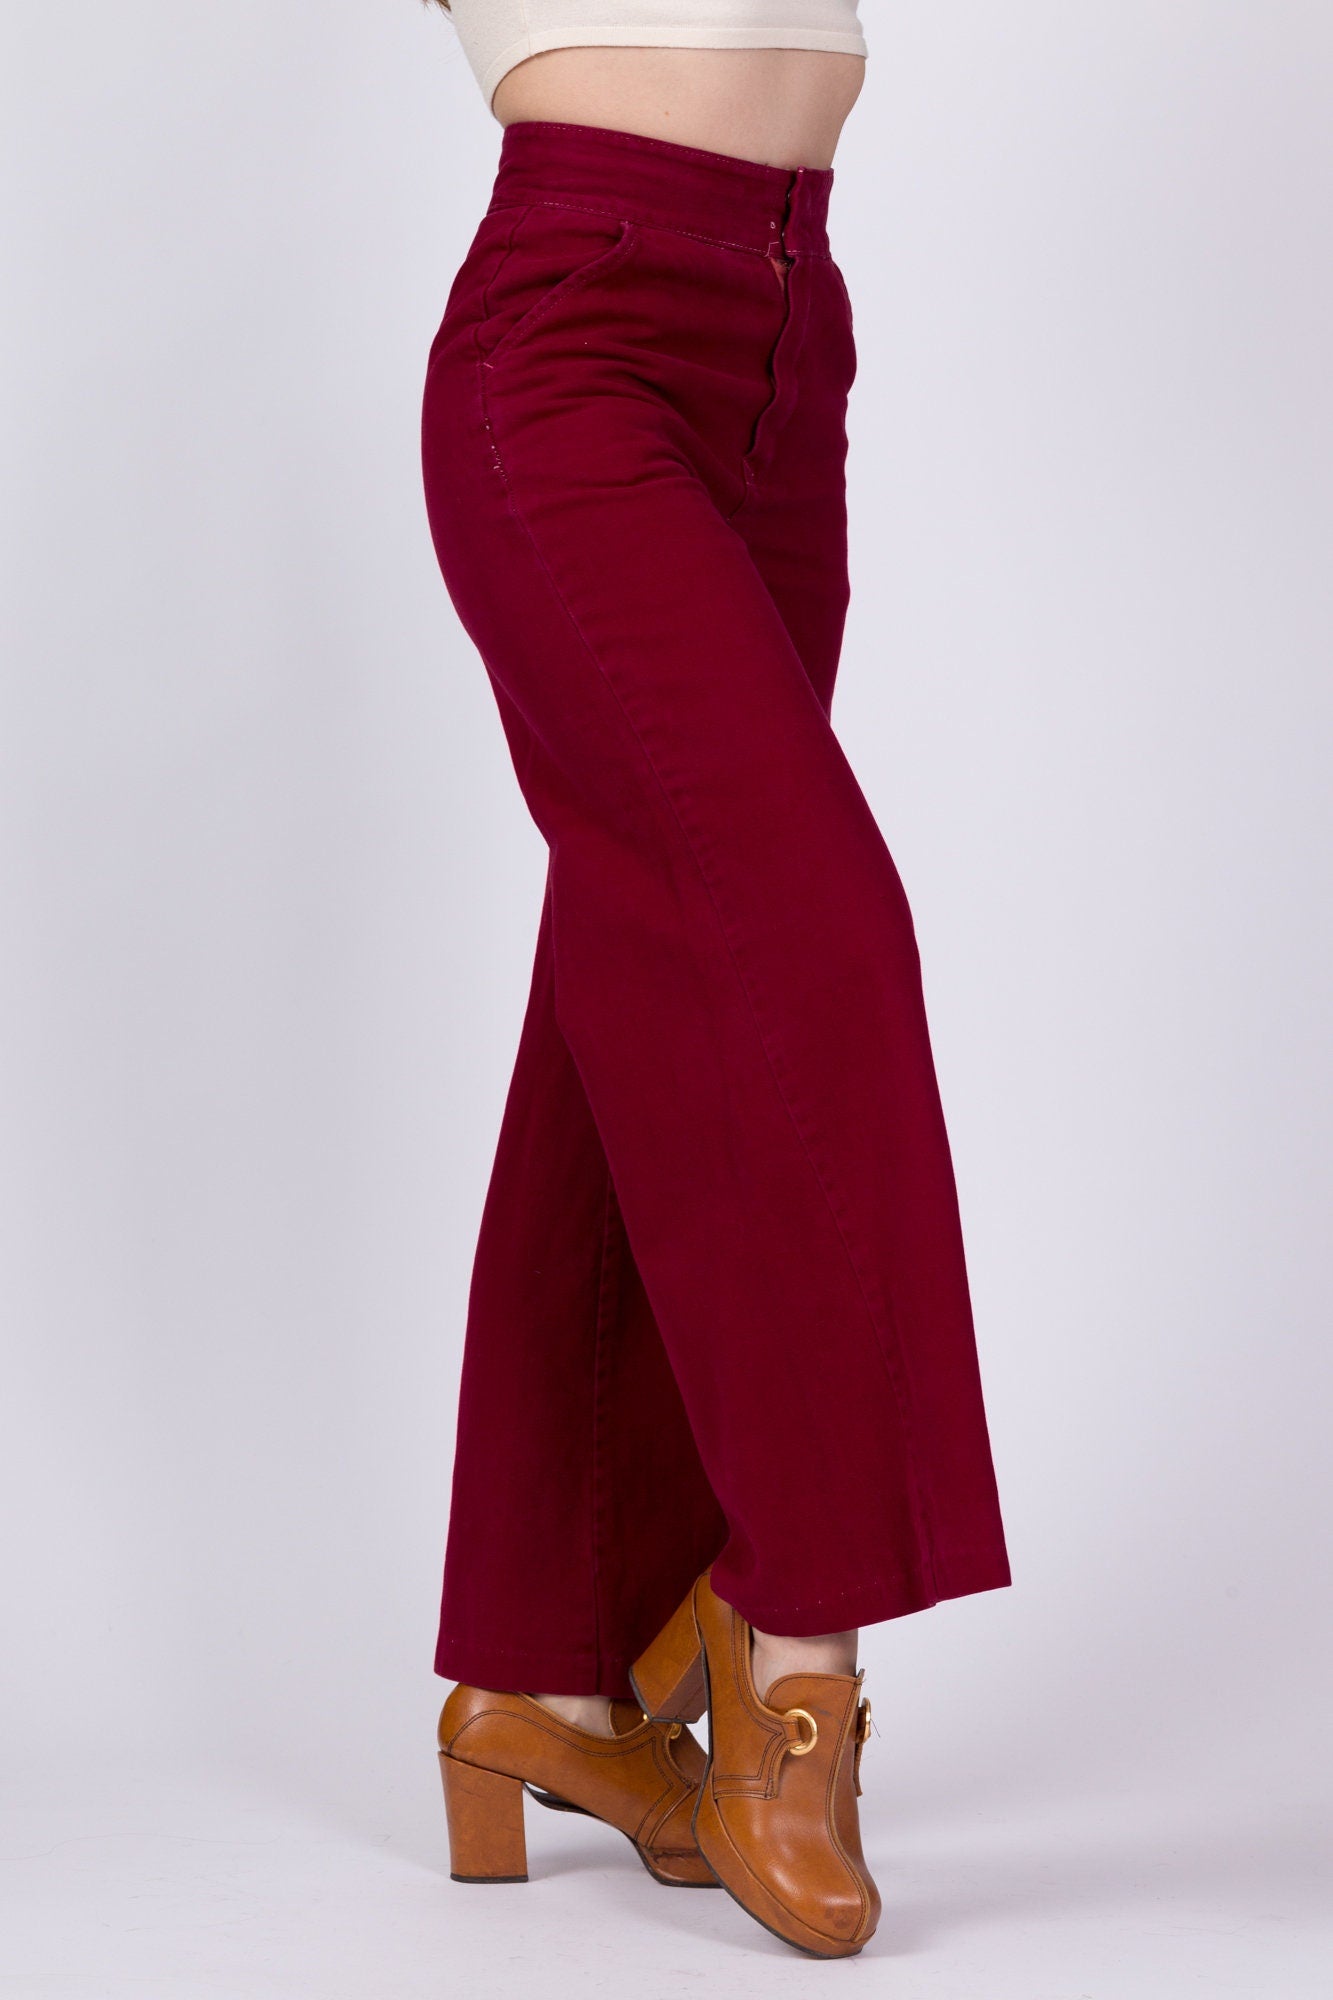 70s Wine Red High Waist Flared Cotton Twill Pants - Extra Small